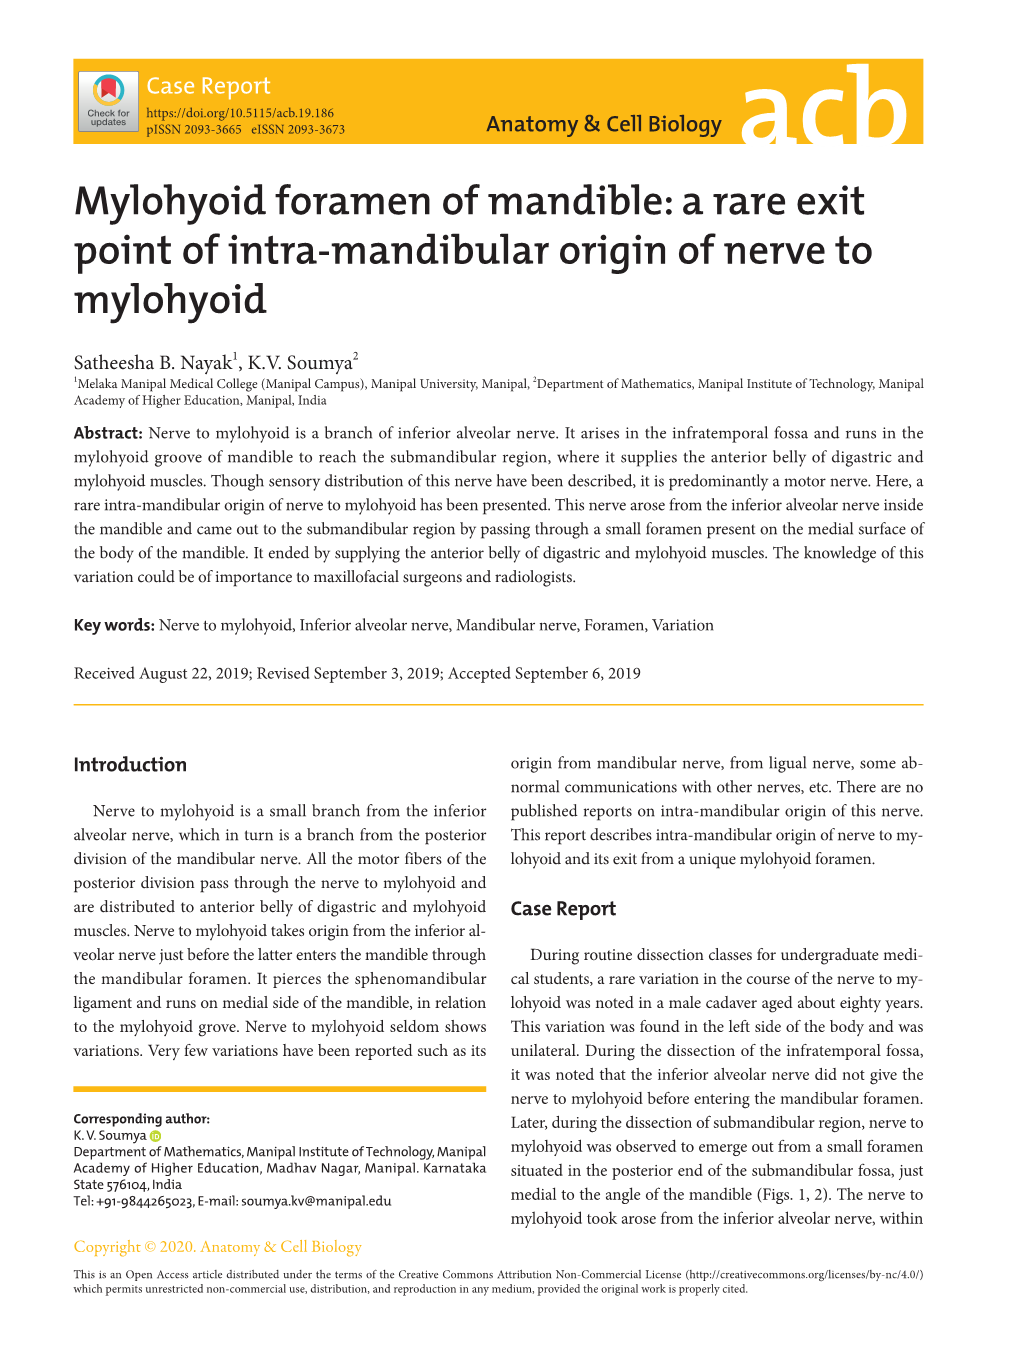 Mylohyoid Foramen of Mandible: a Rare Exit Point of Intra-Mandibular Origin of Nerve to Mylohyoid